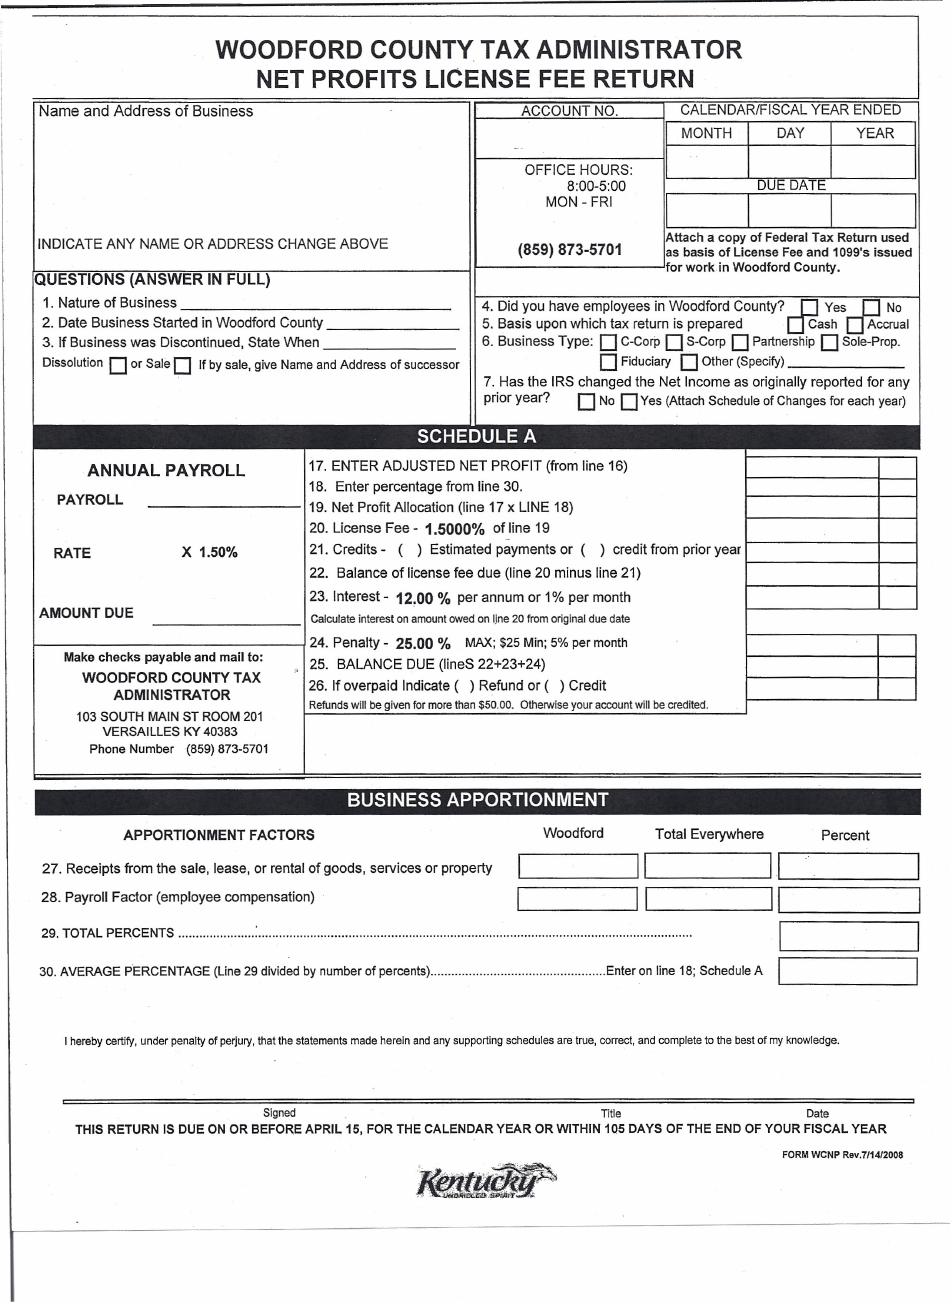 Form WCNP Net Profits License Fee Return - Woodford County, Kentucky, Page 1